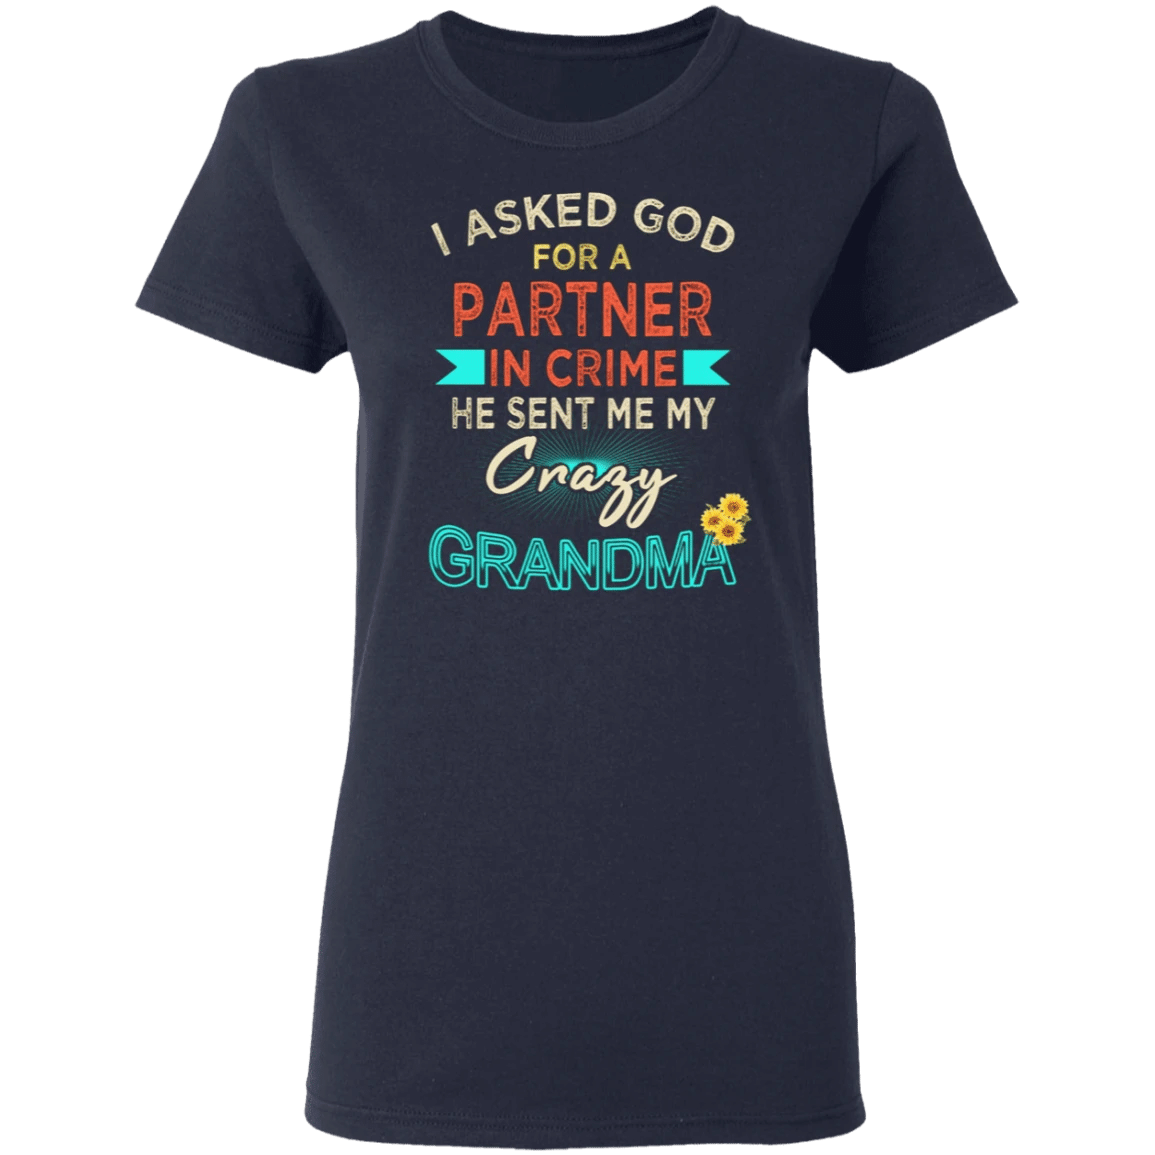 I Asked God For A Partner In Crime He Sent Me My Crazy Grandma Funny Shirt Sayings